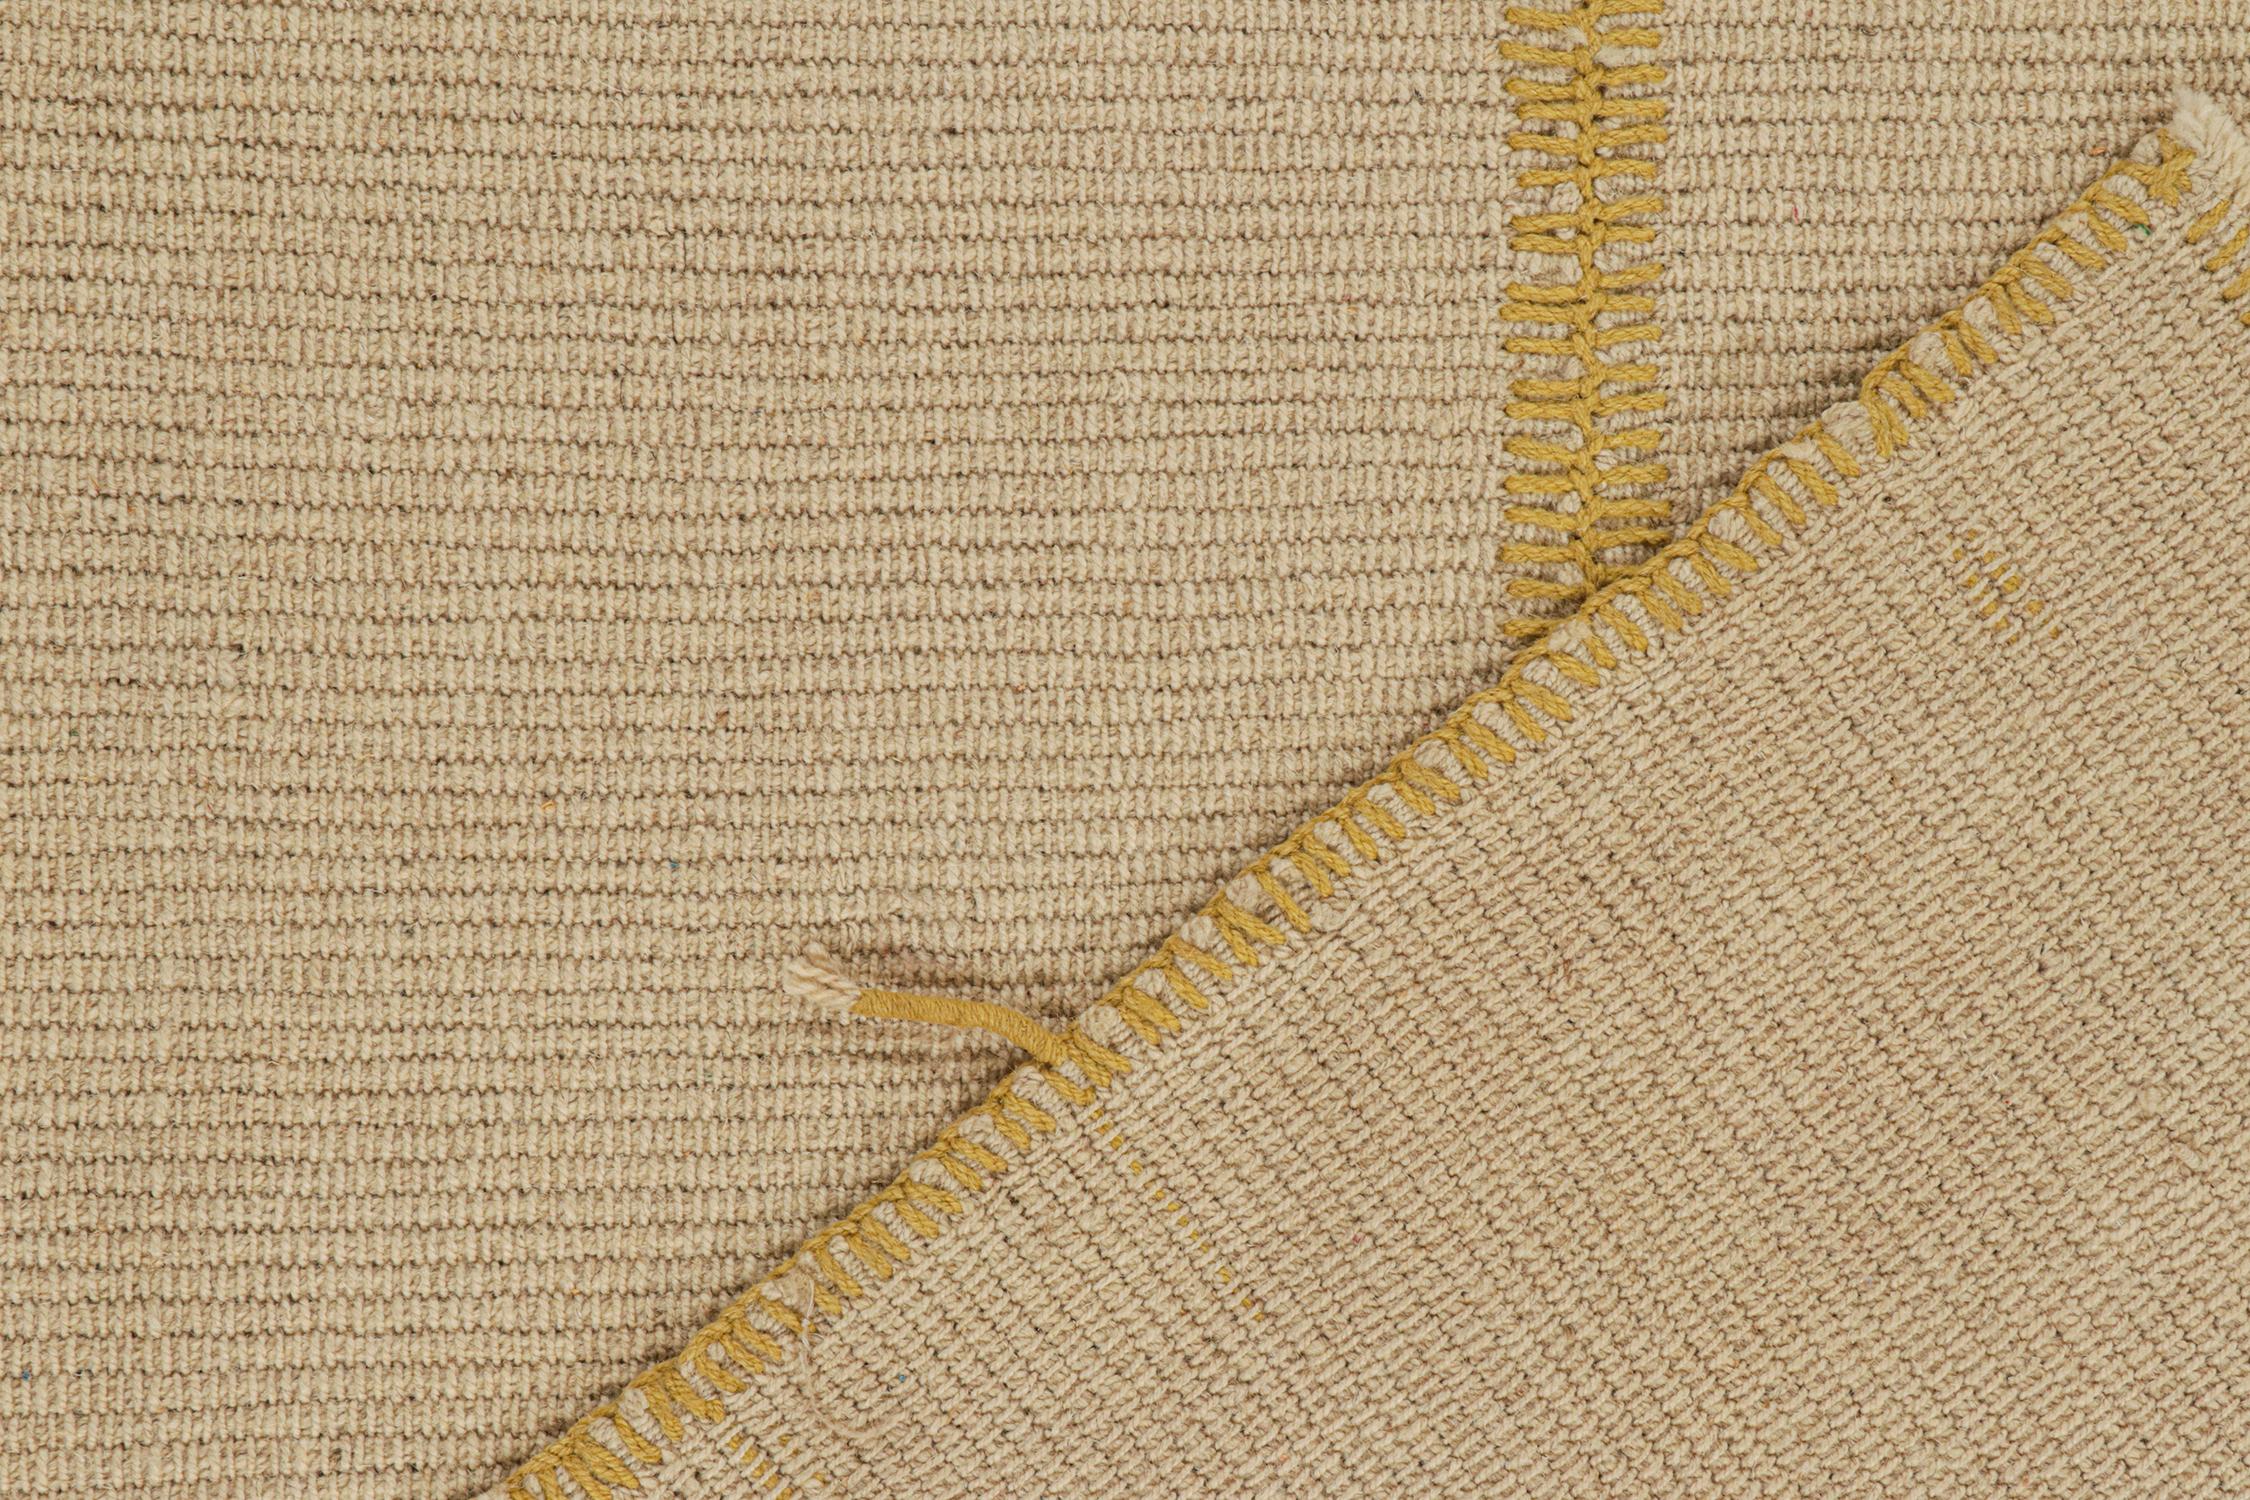 Rug & Kilim’s Contemporary Custom Kilim Design in Beige with Mustard Stripes In New Condition For Sale In Long Island City, NY